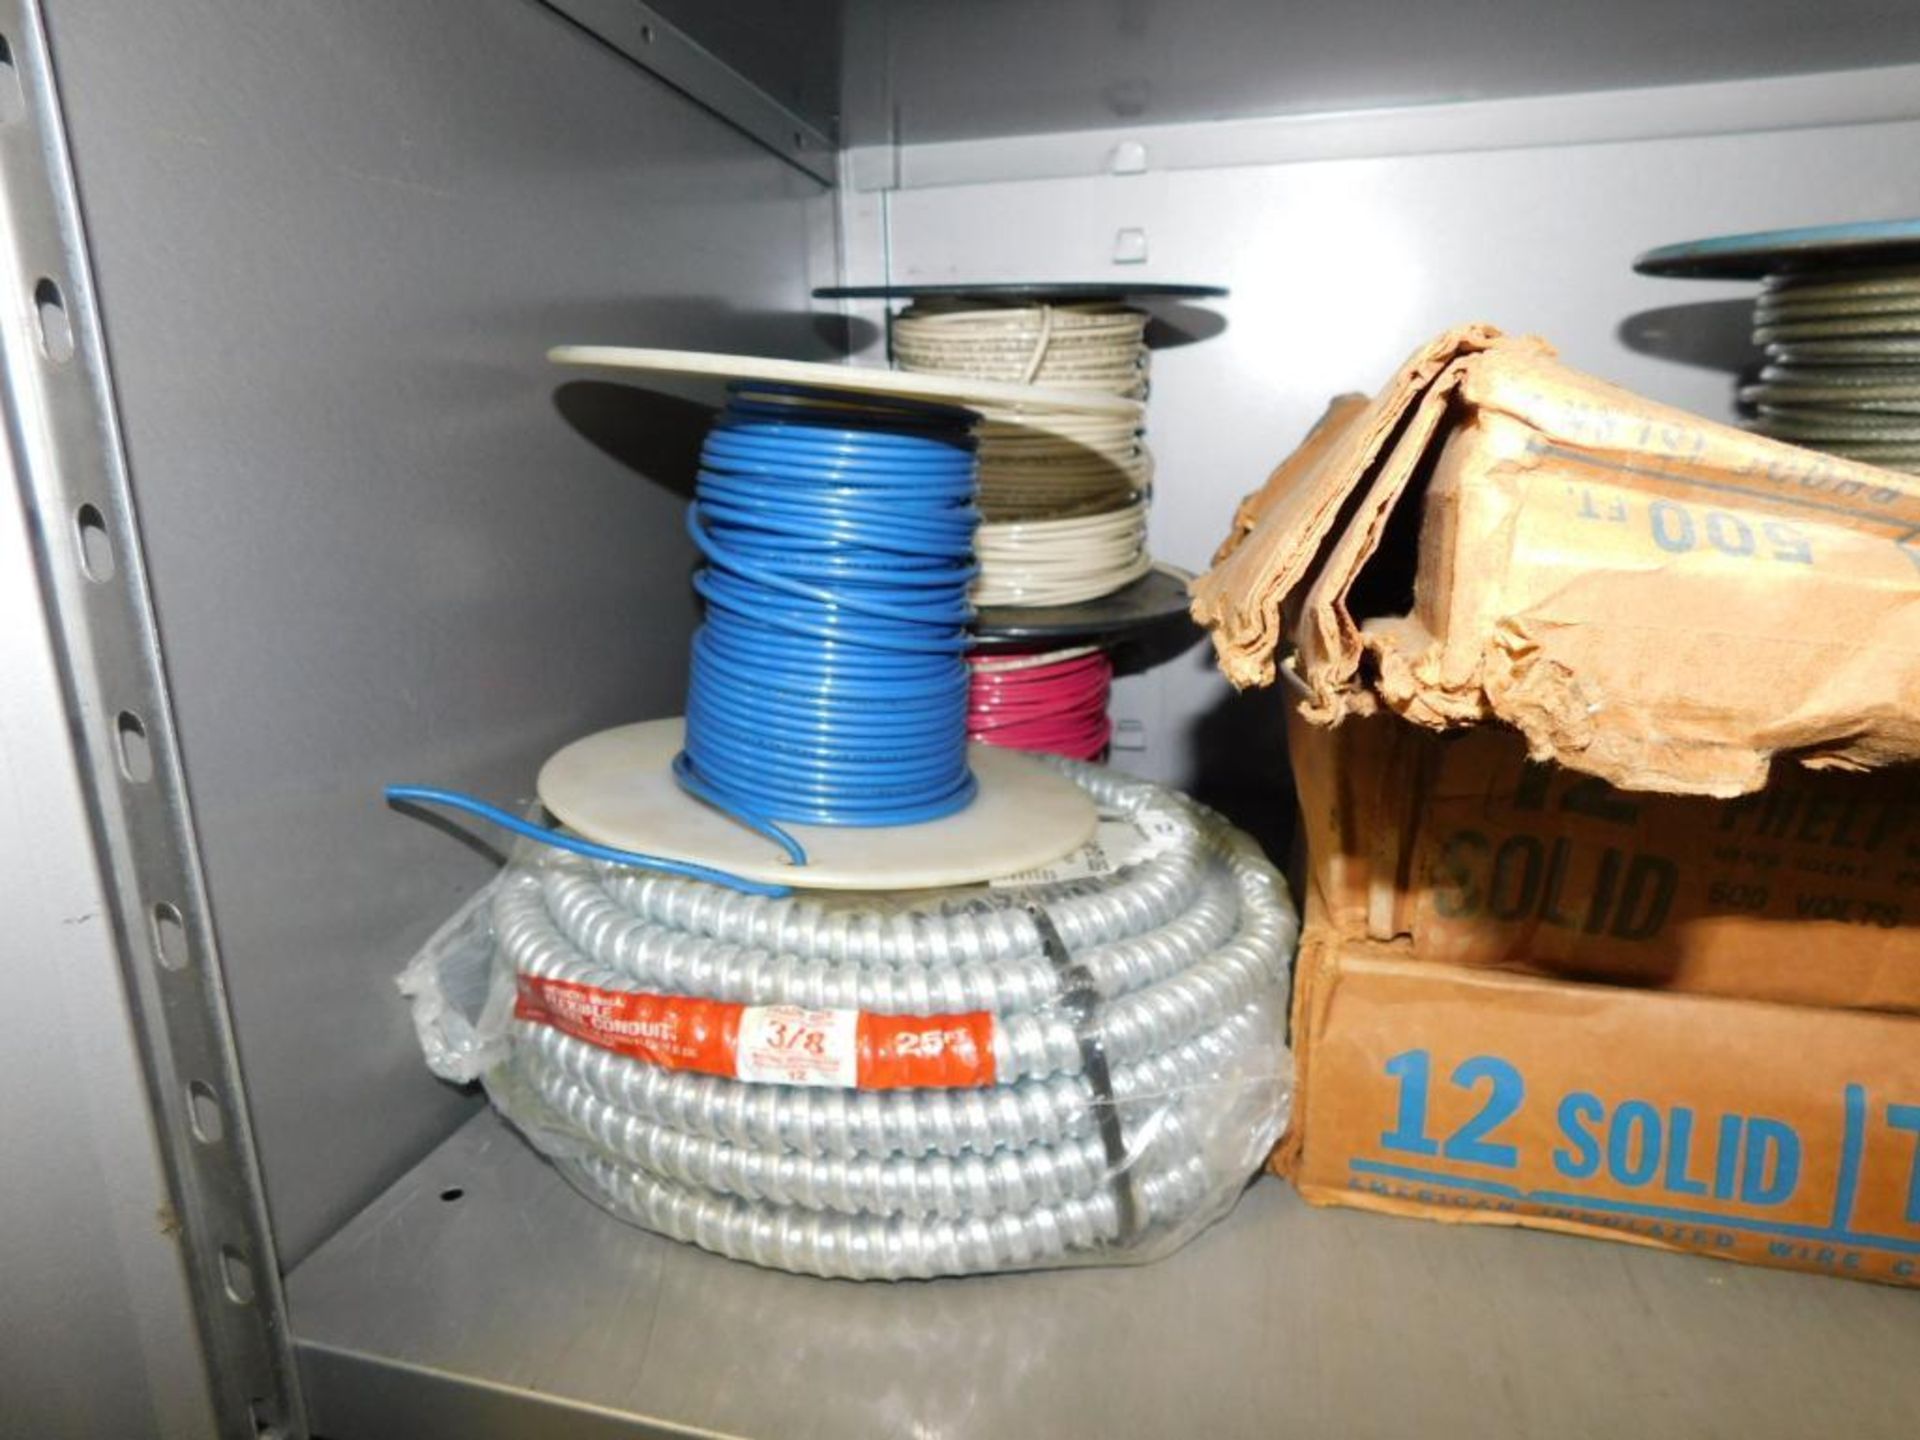 LOT: Cabinet w/Contents, Flexible Conduit, Insulated Wire, (3) Rolls Reflectix Staple Tab Insulation - Image 3 of 16